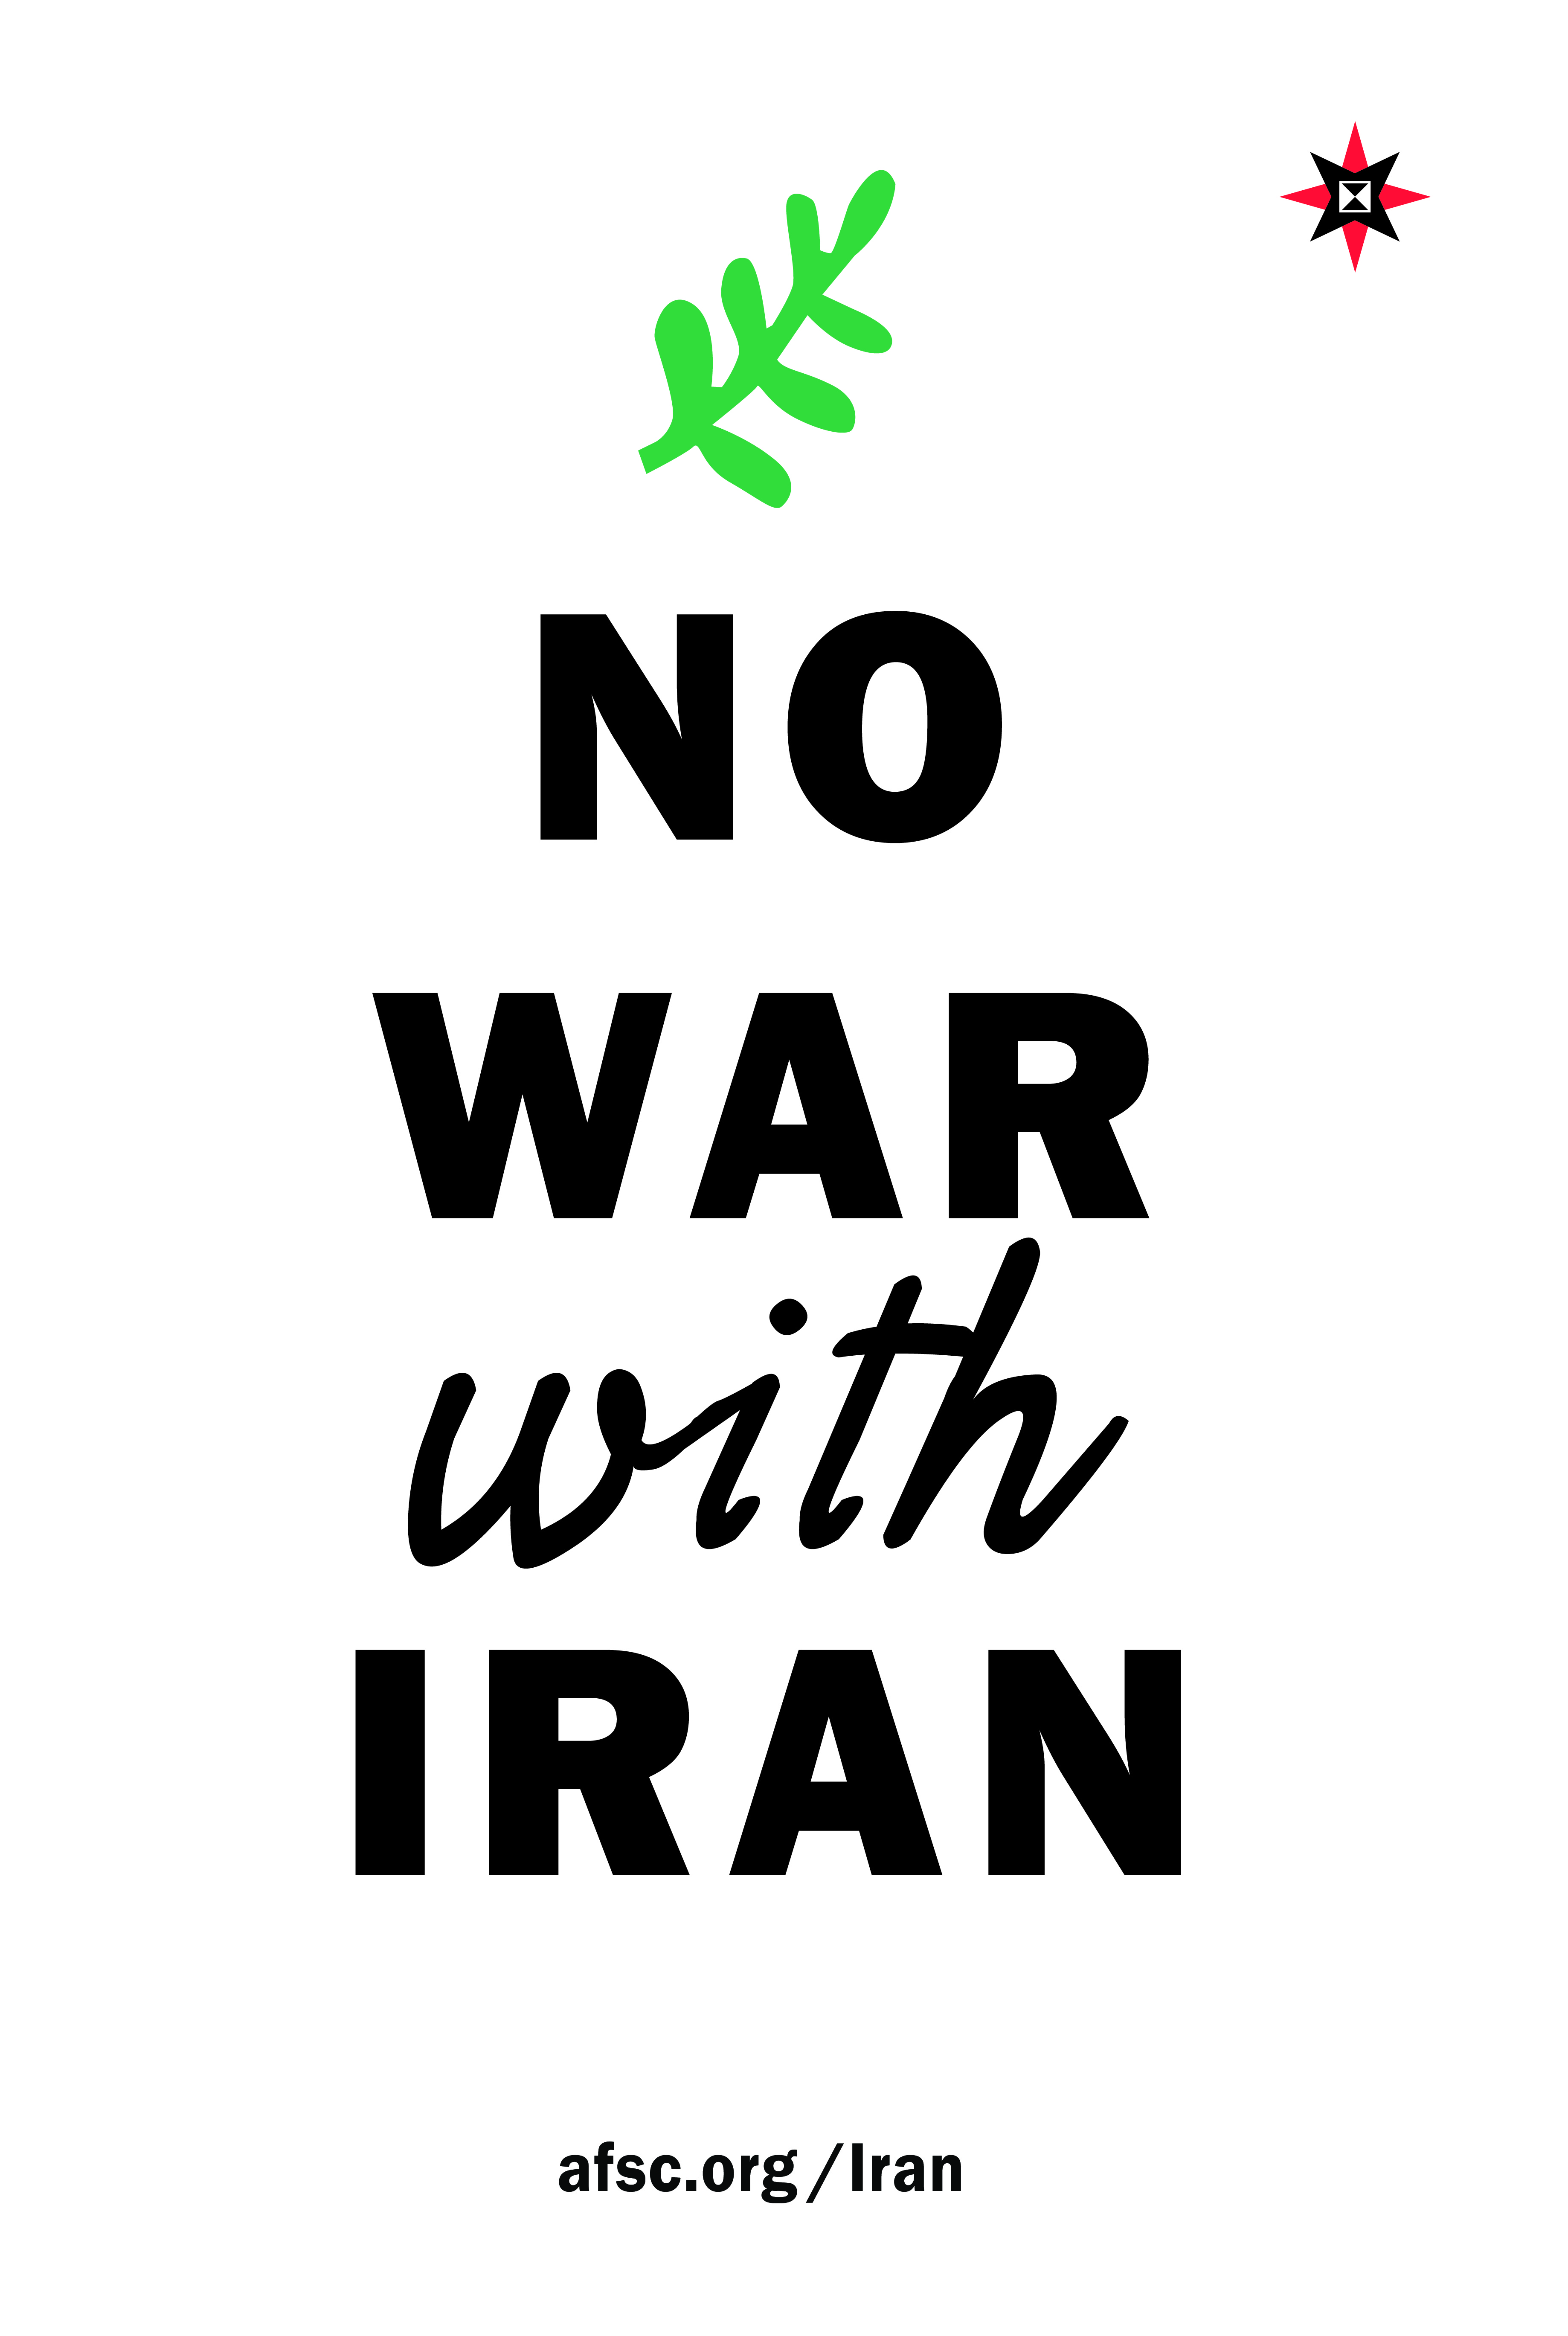 No war with Iran poster (white)